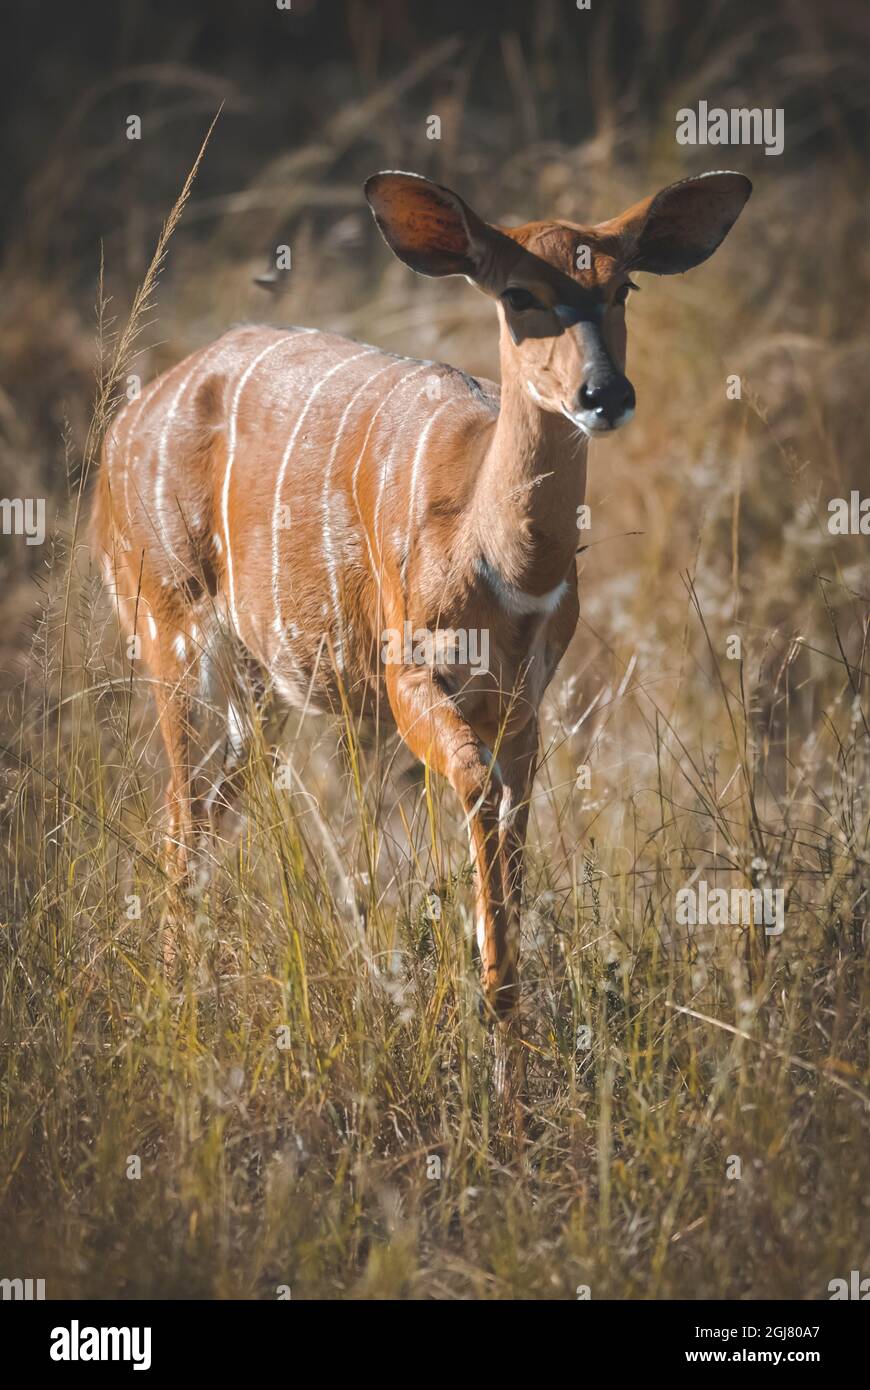 Nyala in African grassland environment, Kruger National park, South Africa. Stock Photo